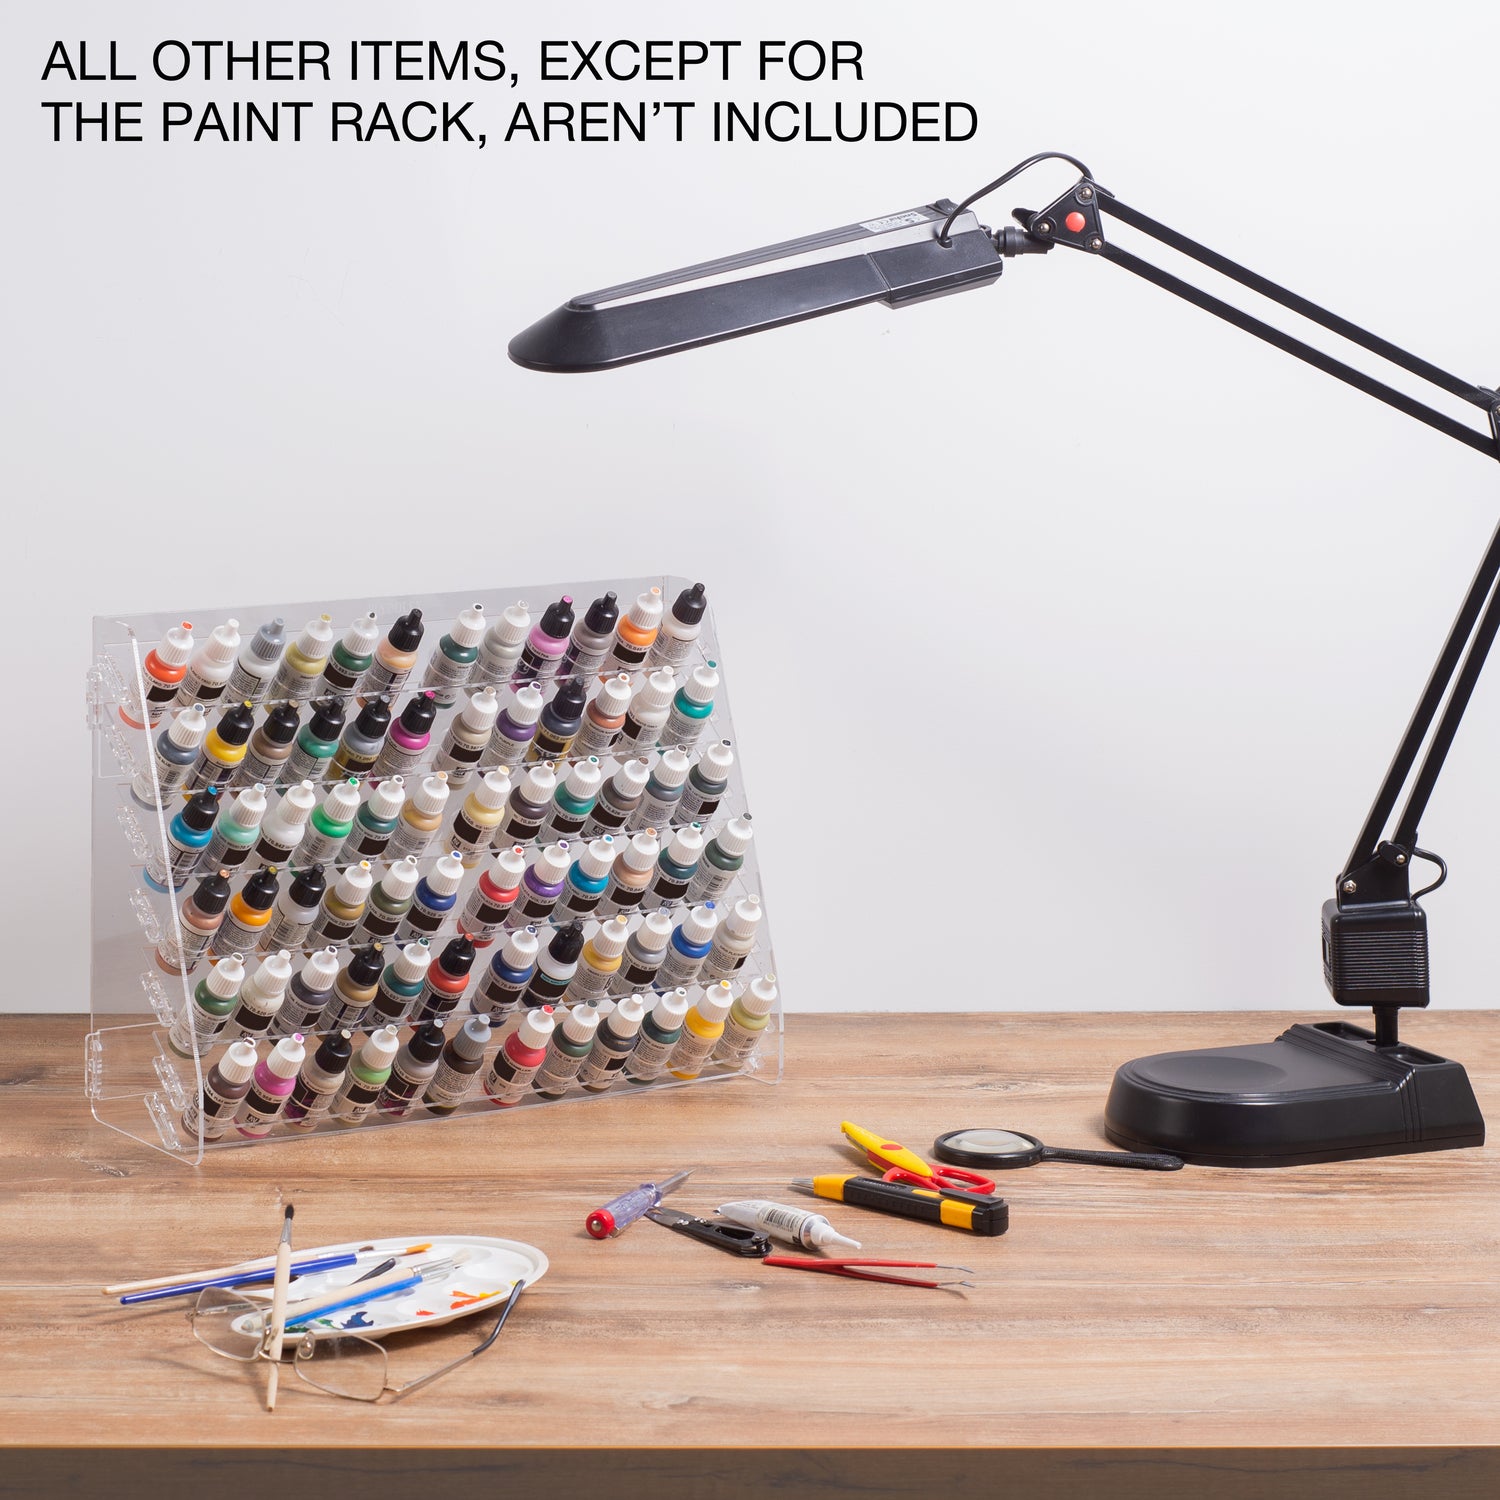 PLYDOLEX Paint Rack Organizer with 65 Holes of 2 Sizes for